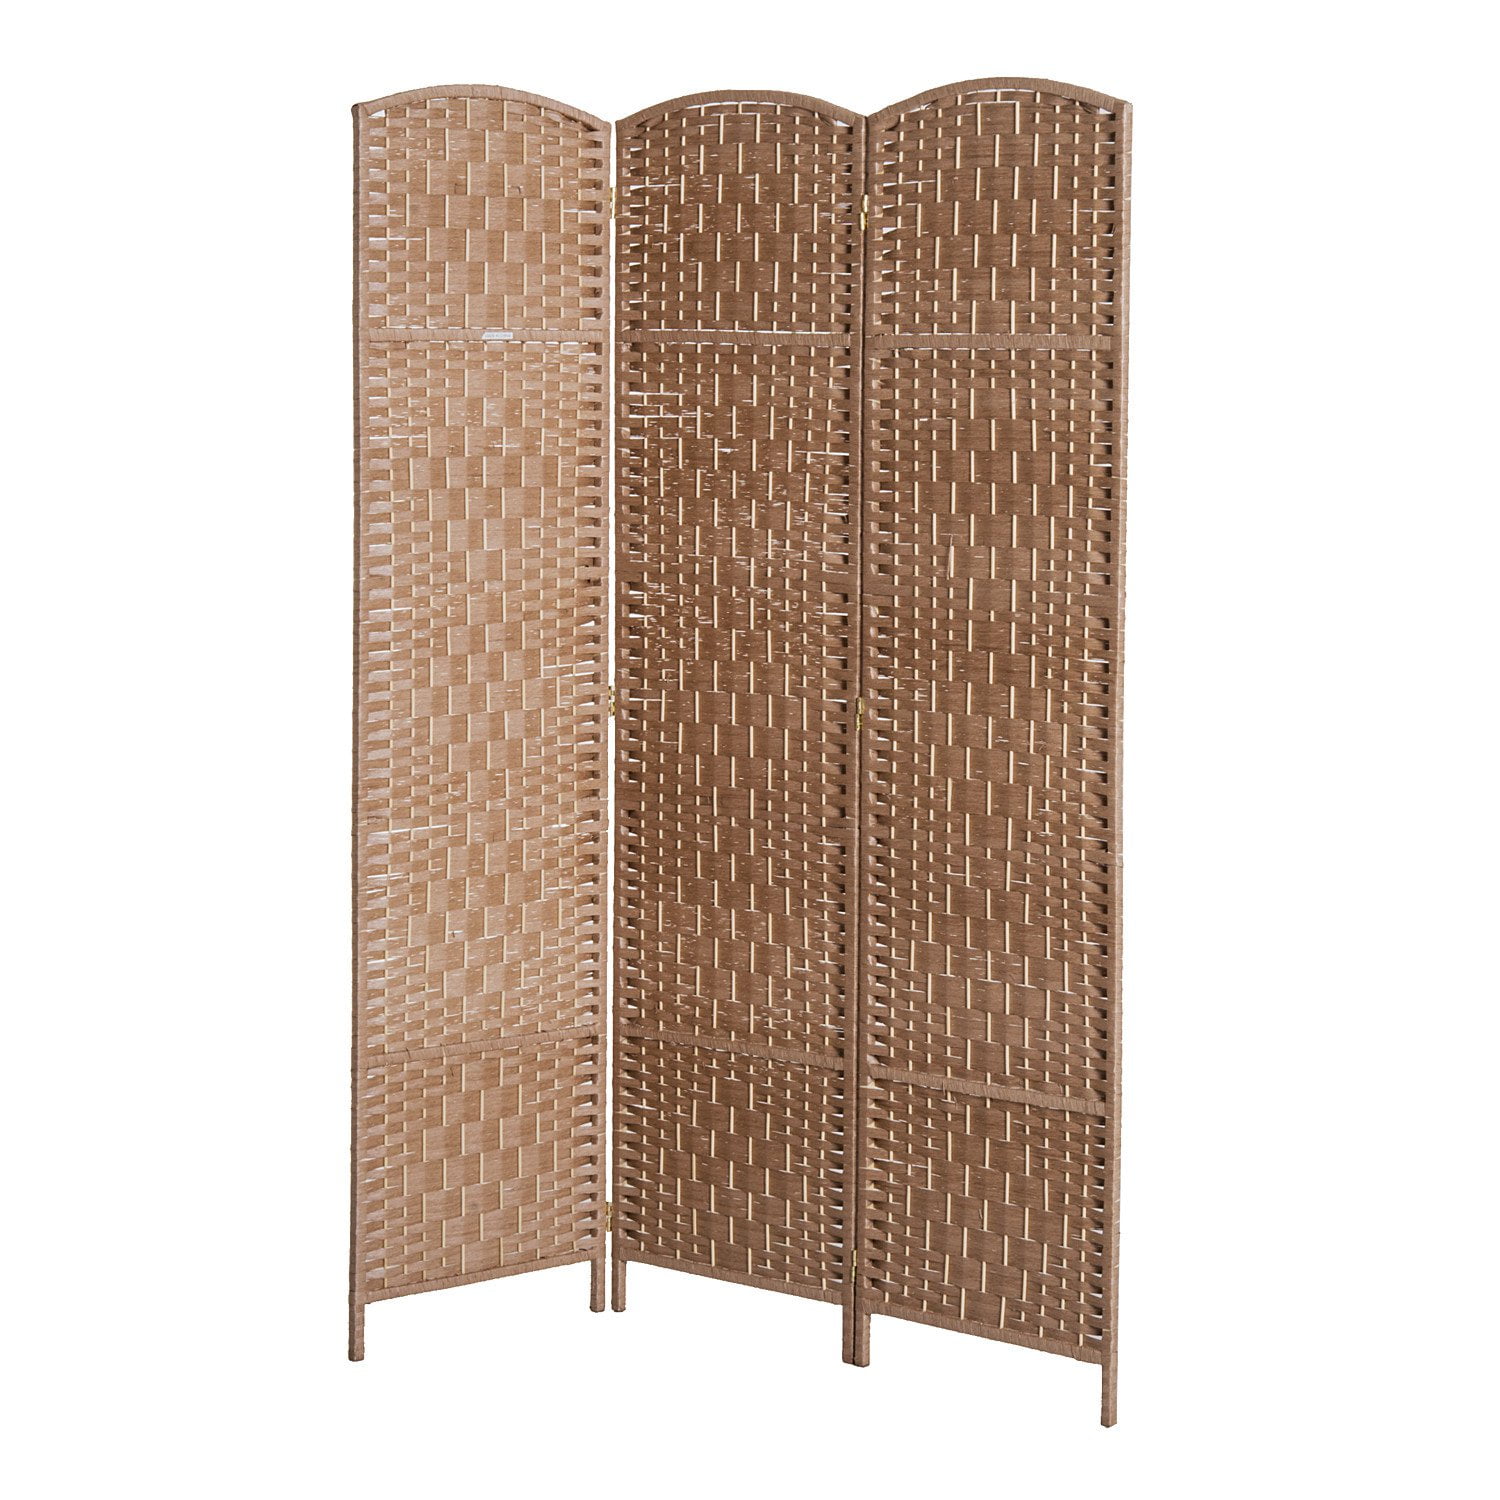 6' Wicker Privacy 3 Panel Screen Steel Frame Patio Deck and Apartment Divider for sale online 